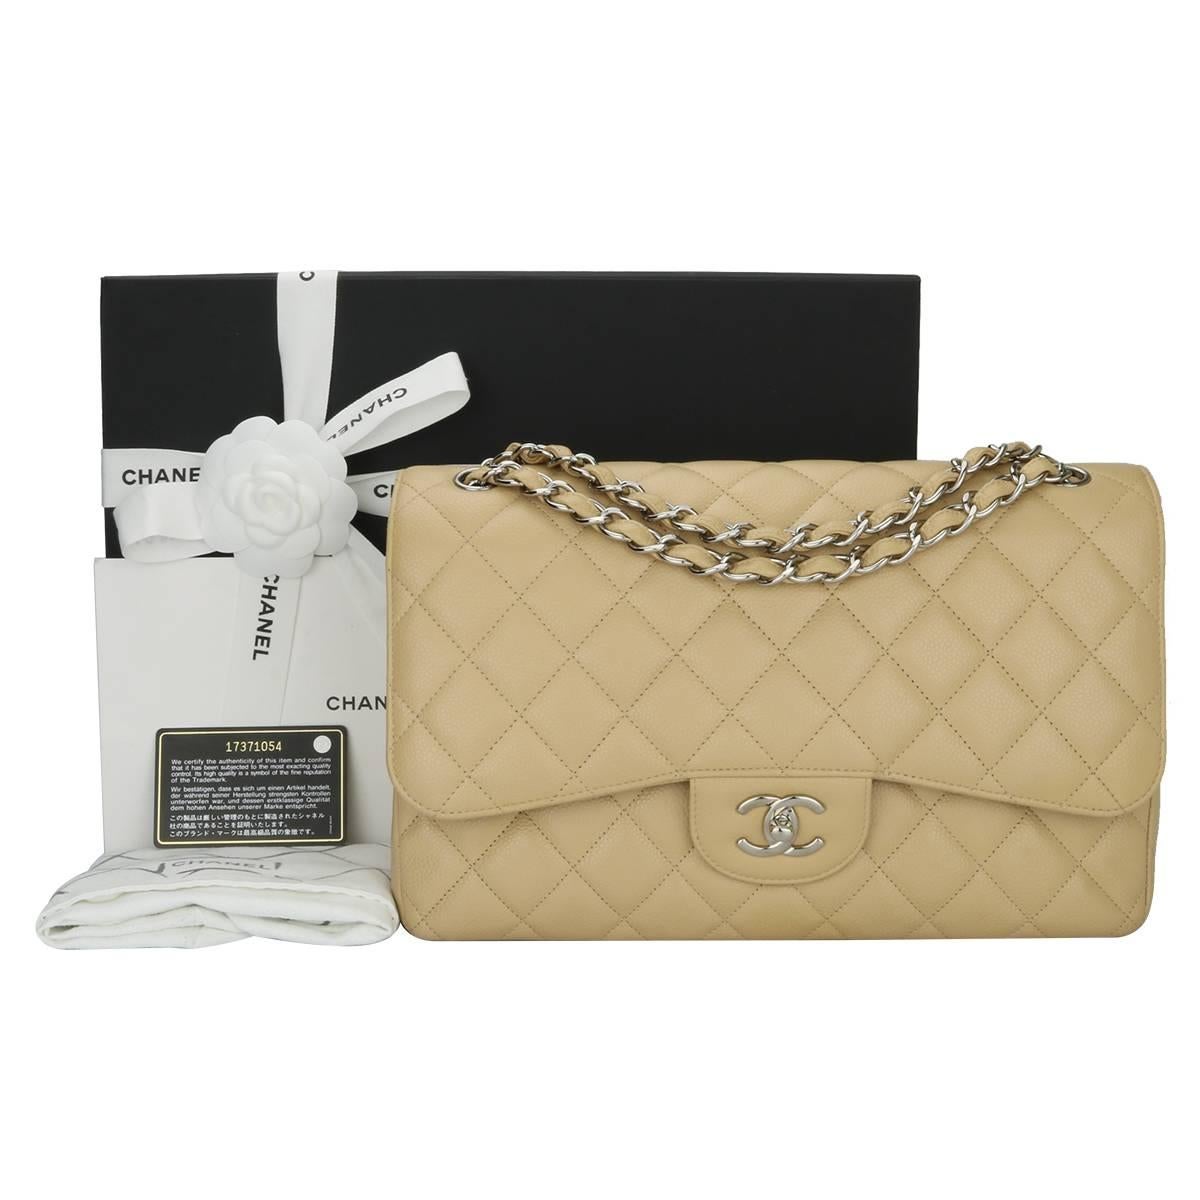 Authentic CHANEL Classic Double Flap Jumbo Bag Beige Clair Caviar with Silver Hardware 2013.

This stunning bag is in mint condition, the bag still holds the original shape and the hardware is still very shiny.

Exterior Condition: Mint condition,